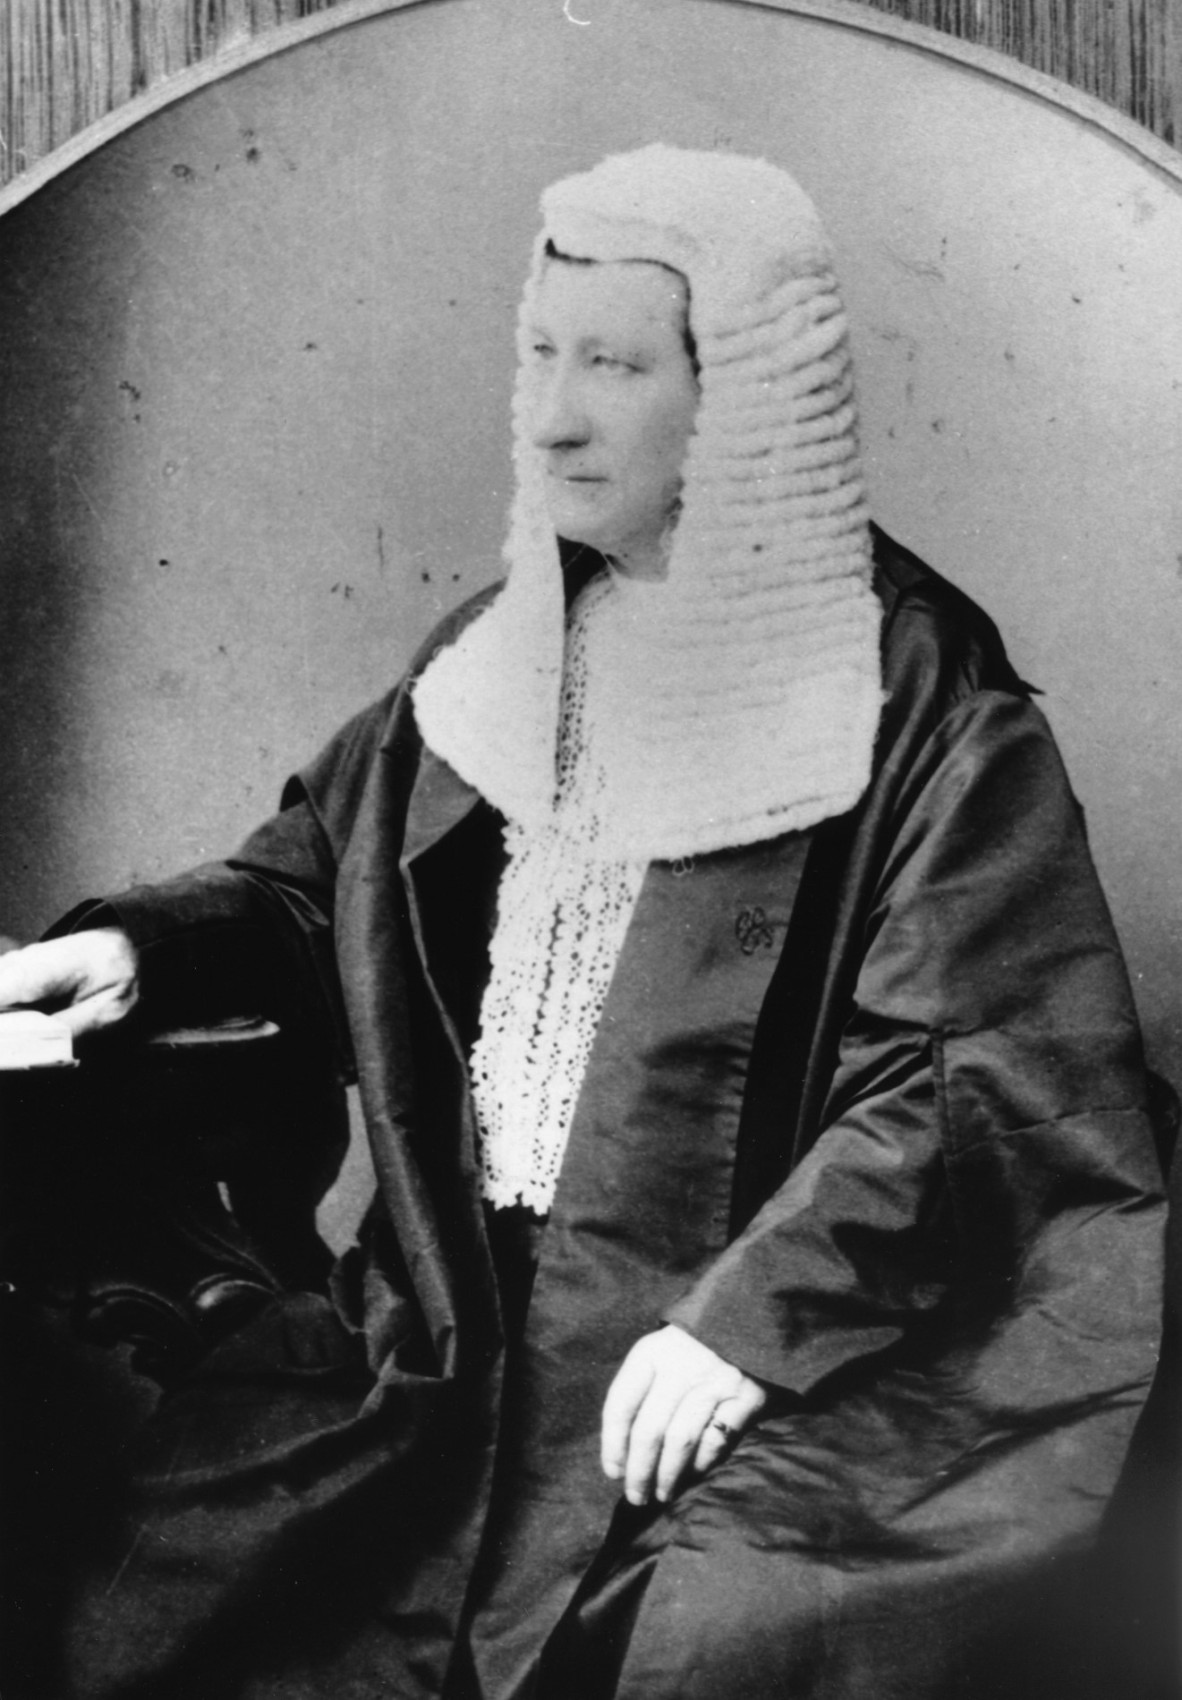 Portrait of William Groom wearing robes and a wig